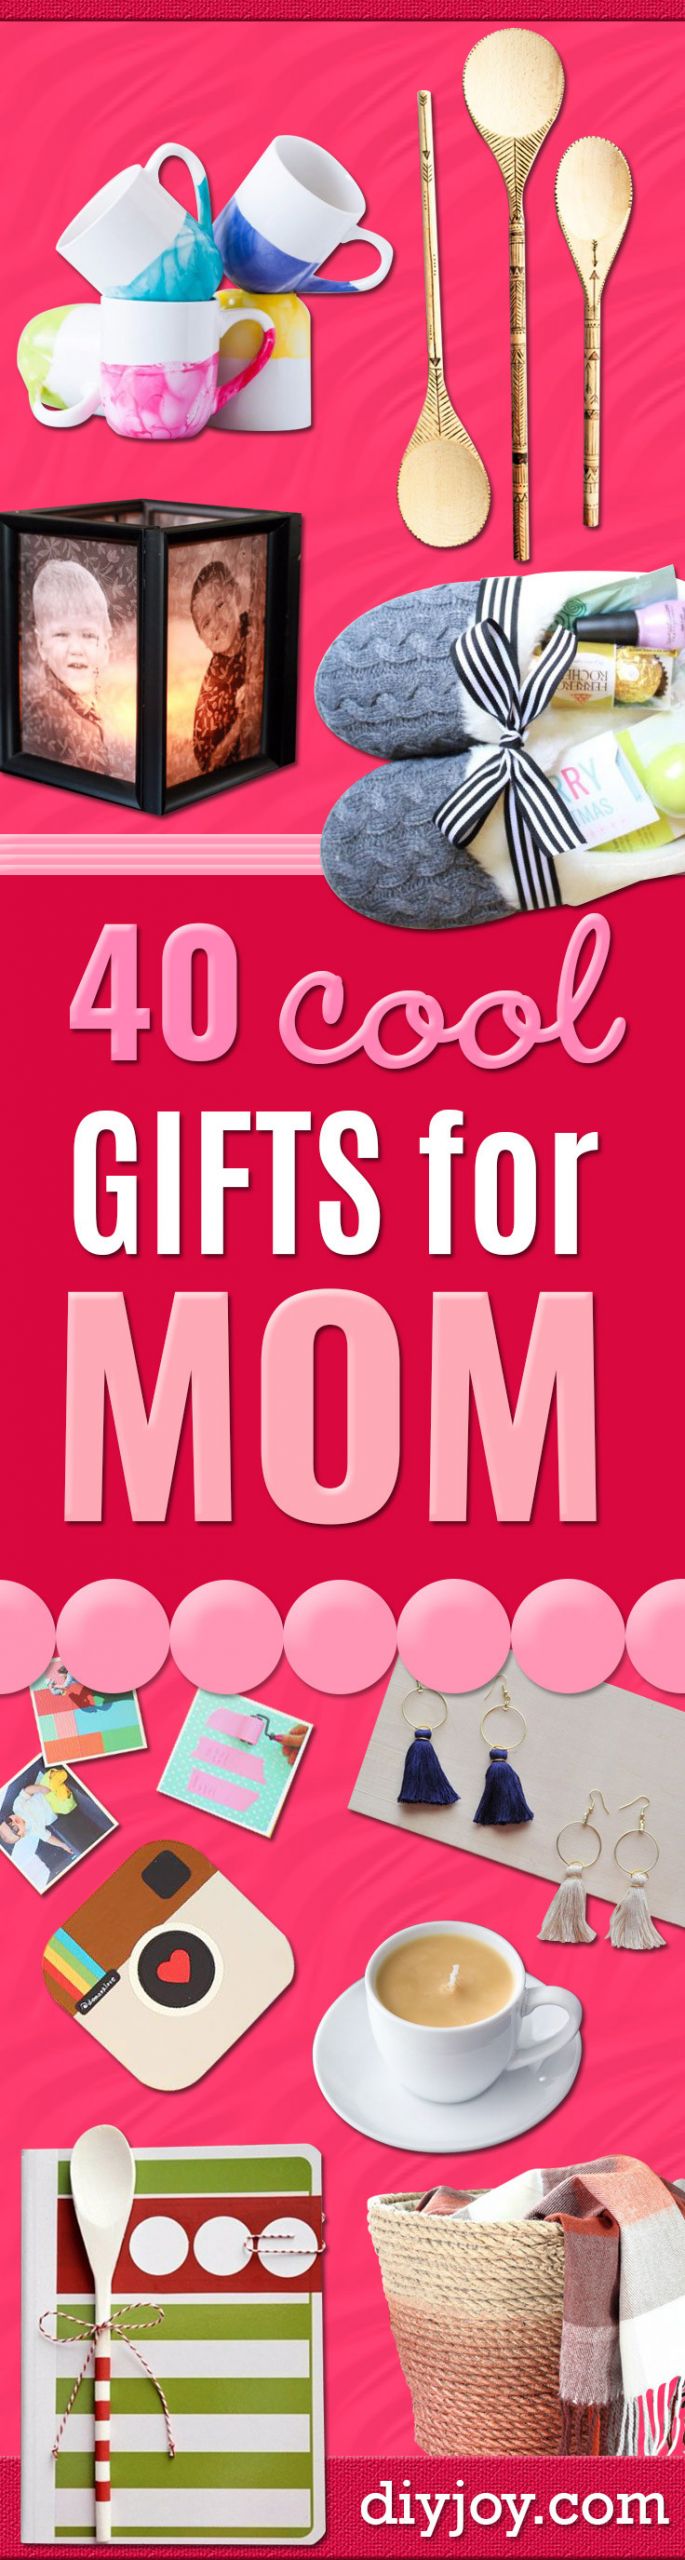 DIY Christmas Presents For Mom
 40 Coolest Gifts To Make for Mom